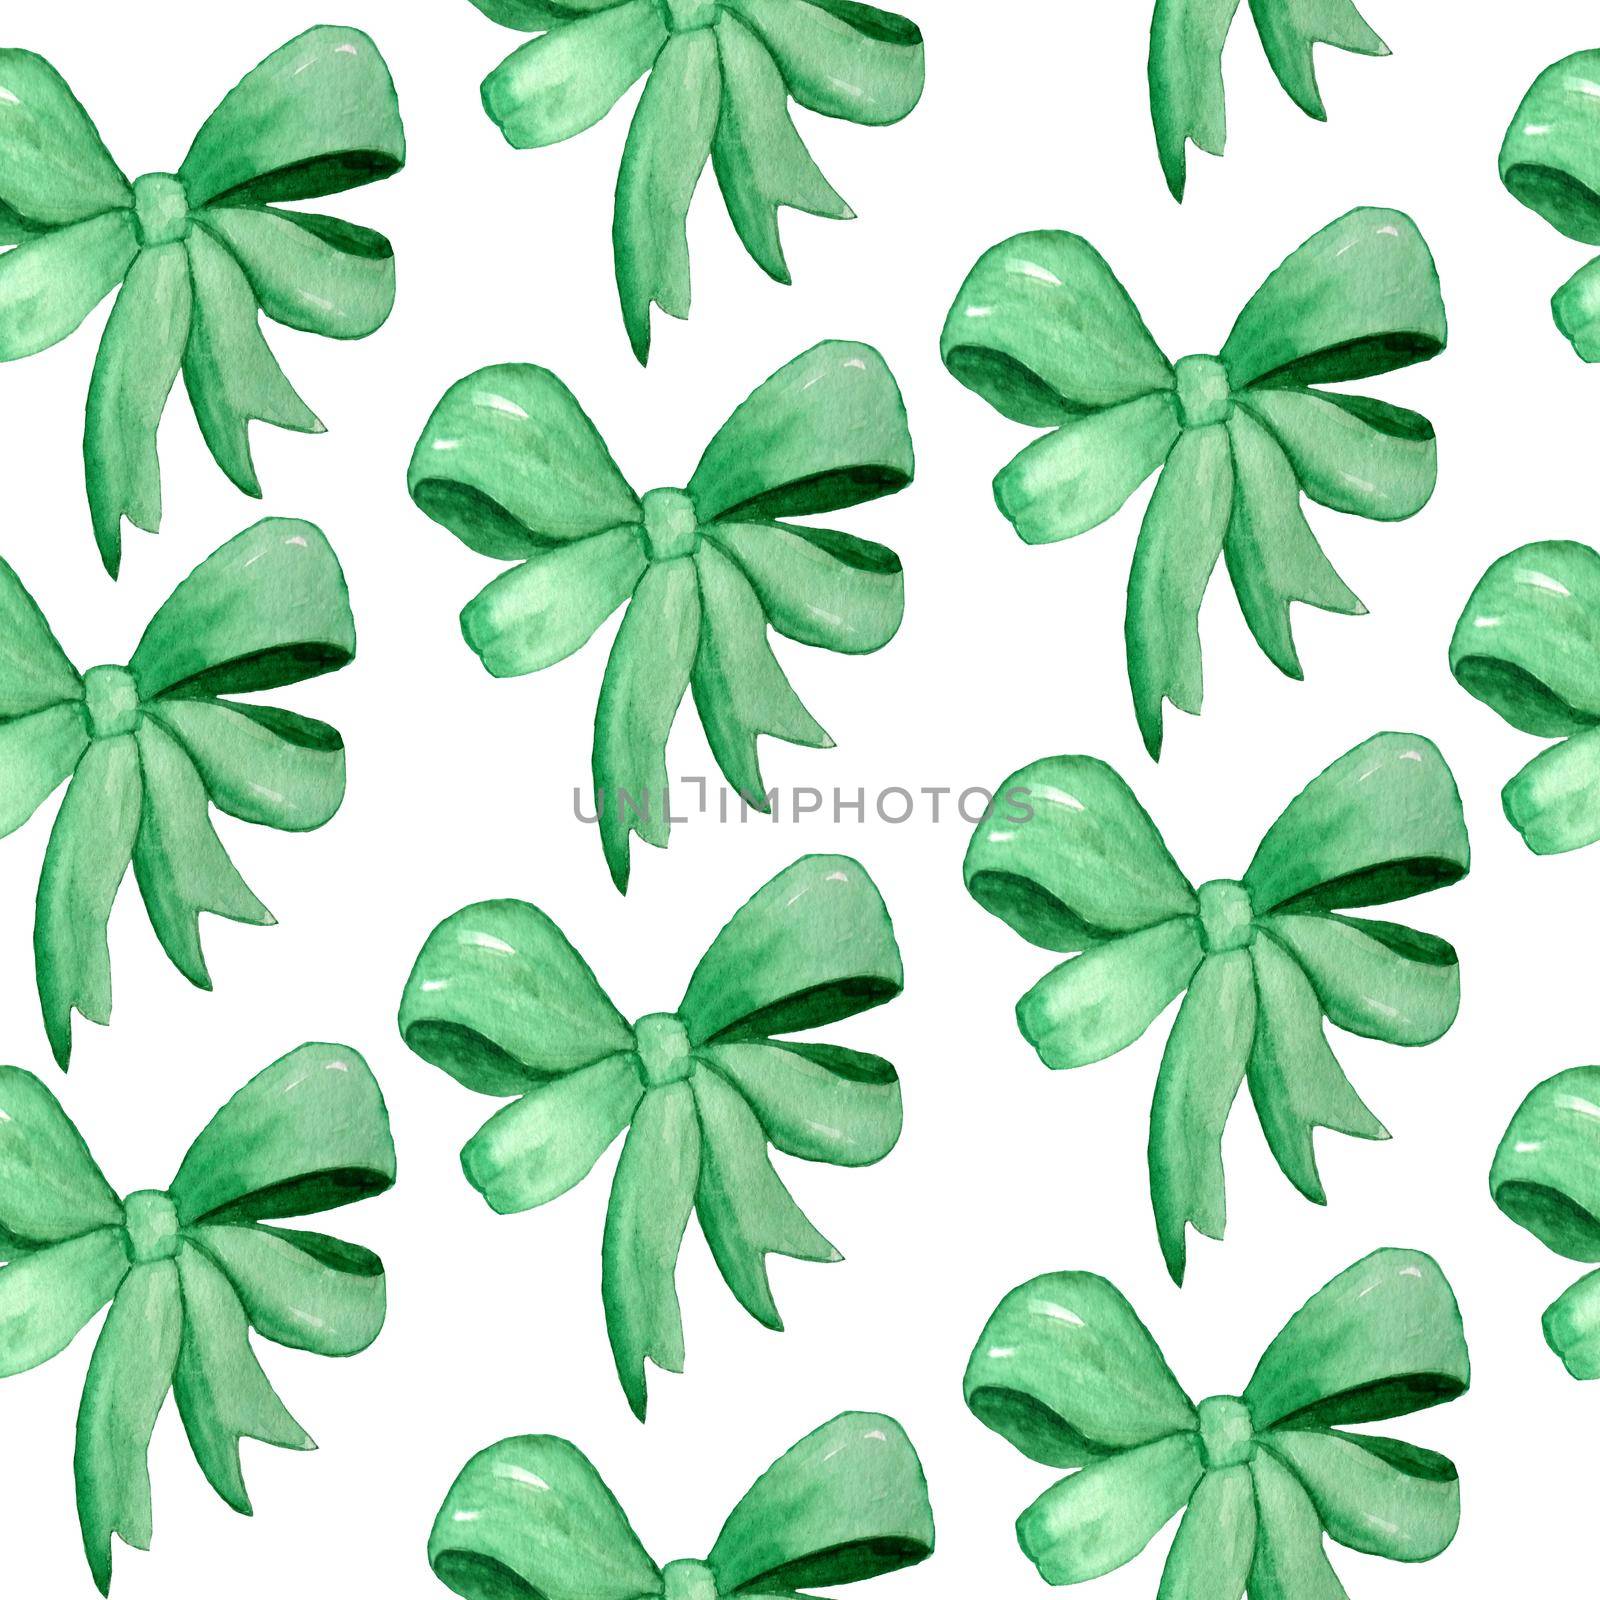 Watercolor hand drawn seamless pattern with green emerald ribbon bows for gifts party celebration birthday decor. Symbols for St Patricks day, irish ireland textile decorative wrapping paper